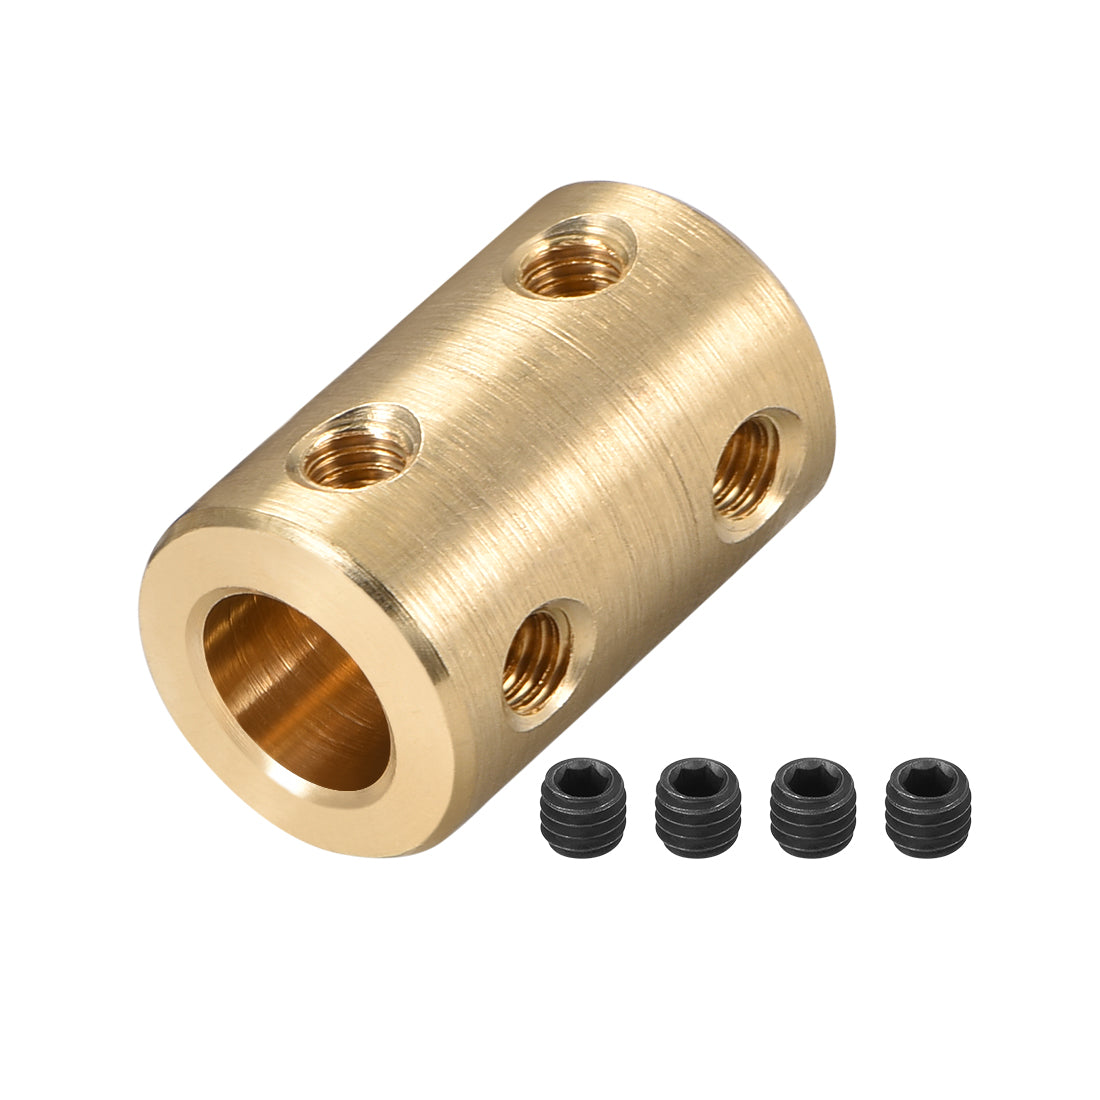 uxcell Uxcell Shaft Coupling 6mm to 8mm Bore L22xD14 Robot Motor Wheel Rigid Coupler Connector Gold Tone